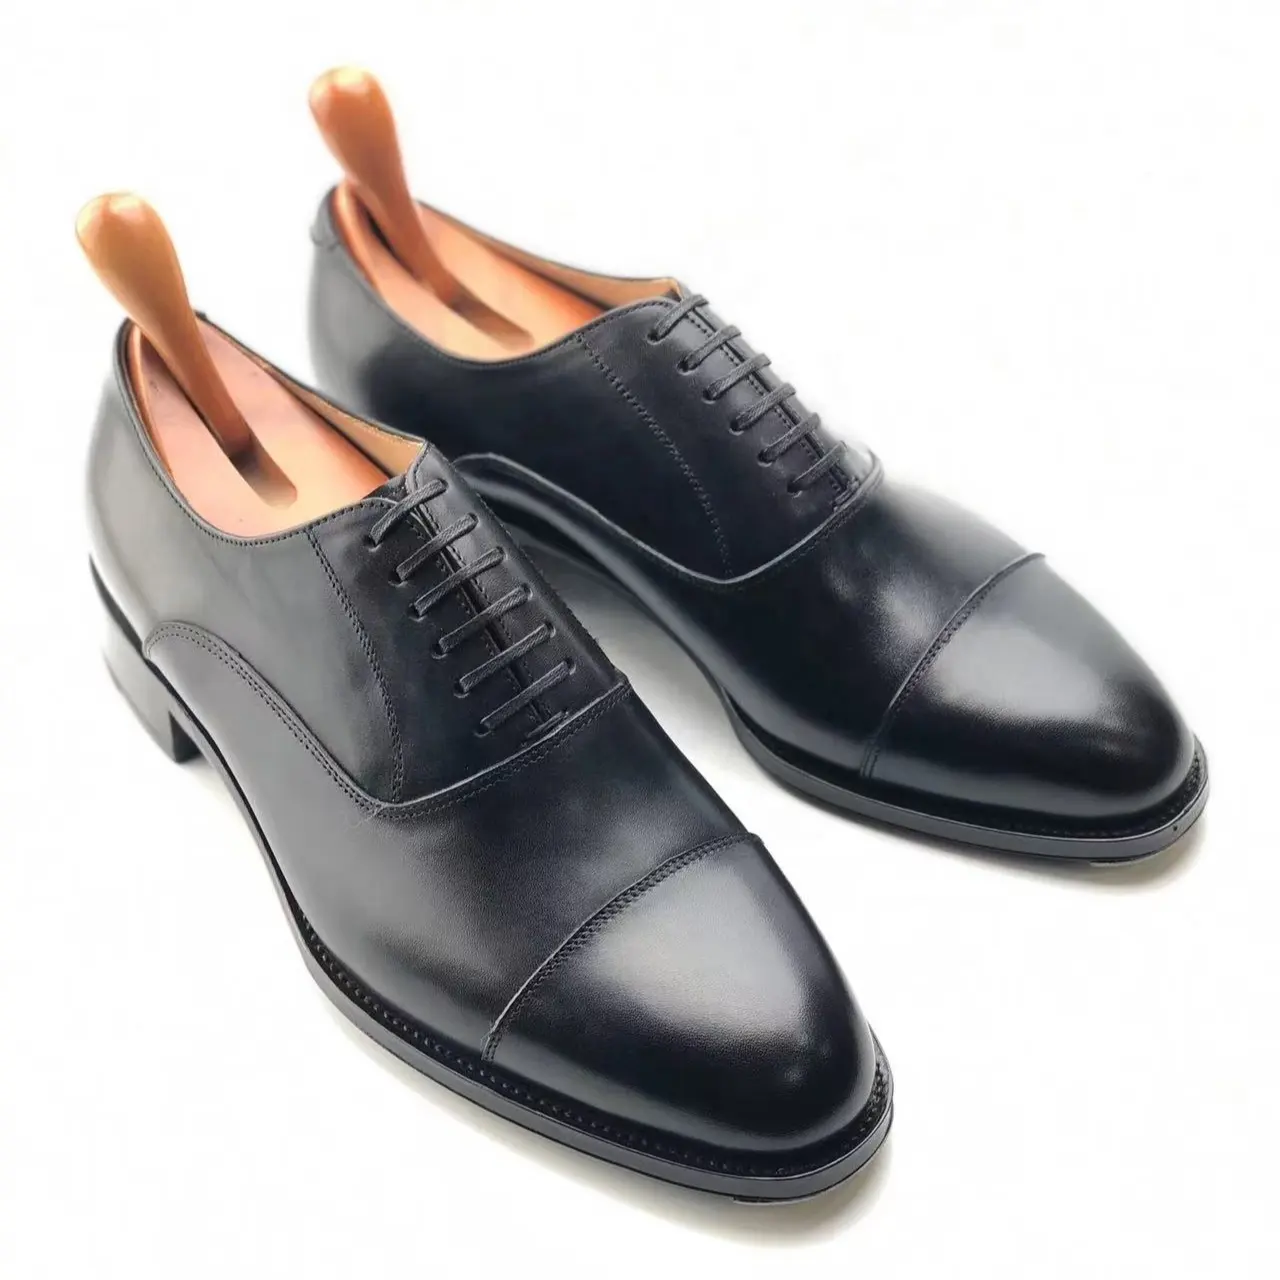 Cie MOX46 Captoe Men's Business Formal Dress Shoes Handmade Leather Breathable Outsole Oxford Goodyear Welted Shoes